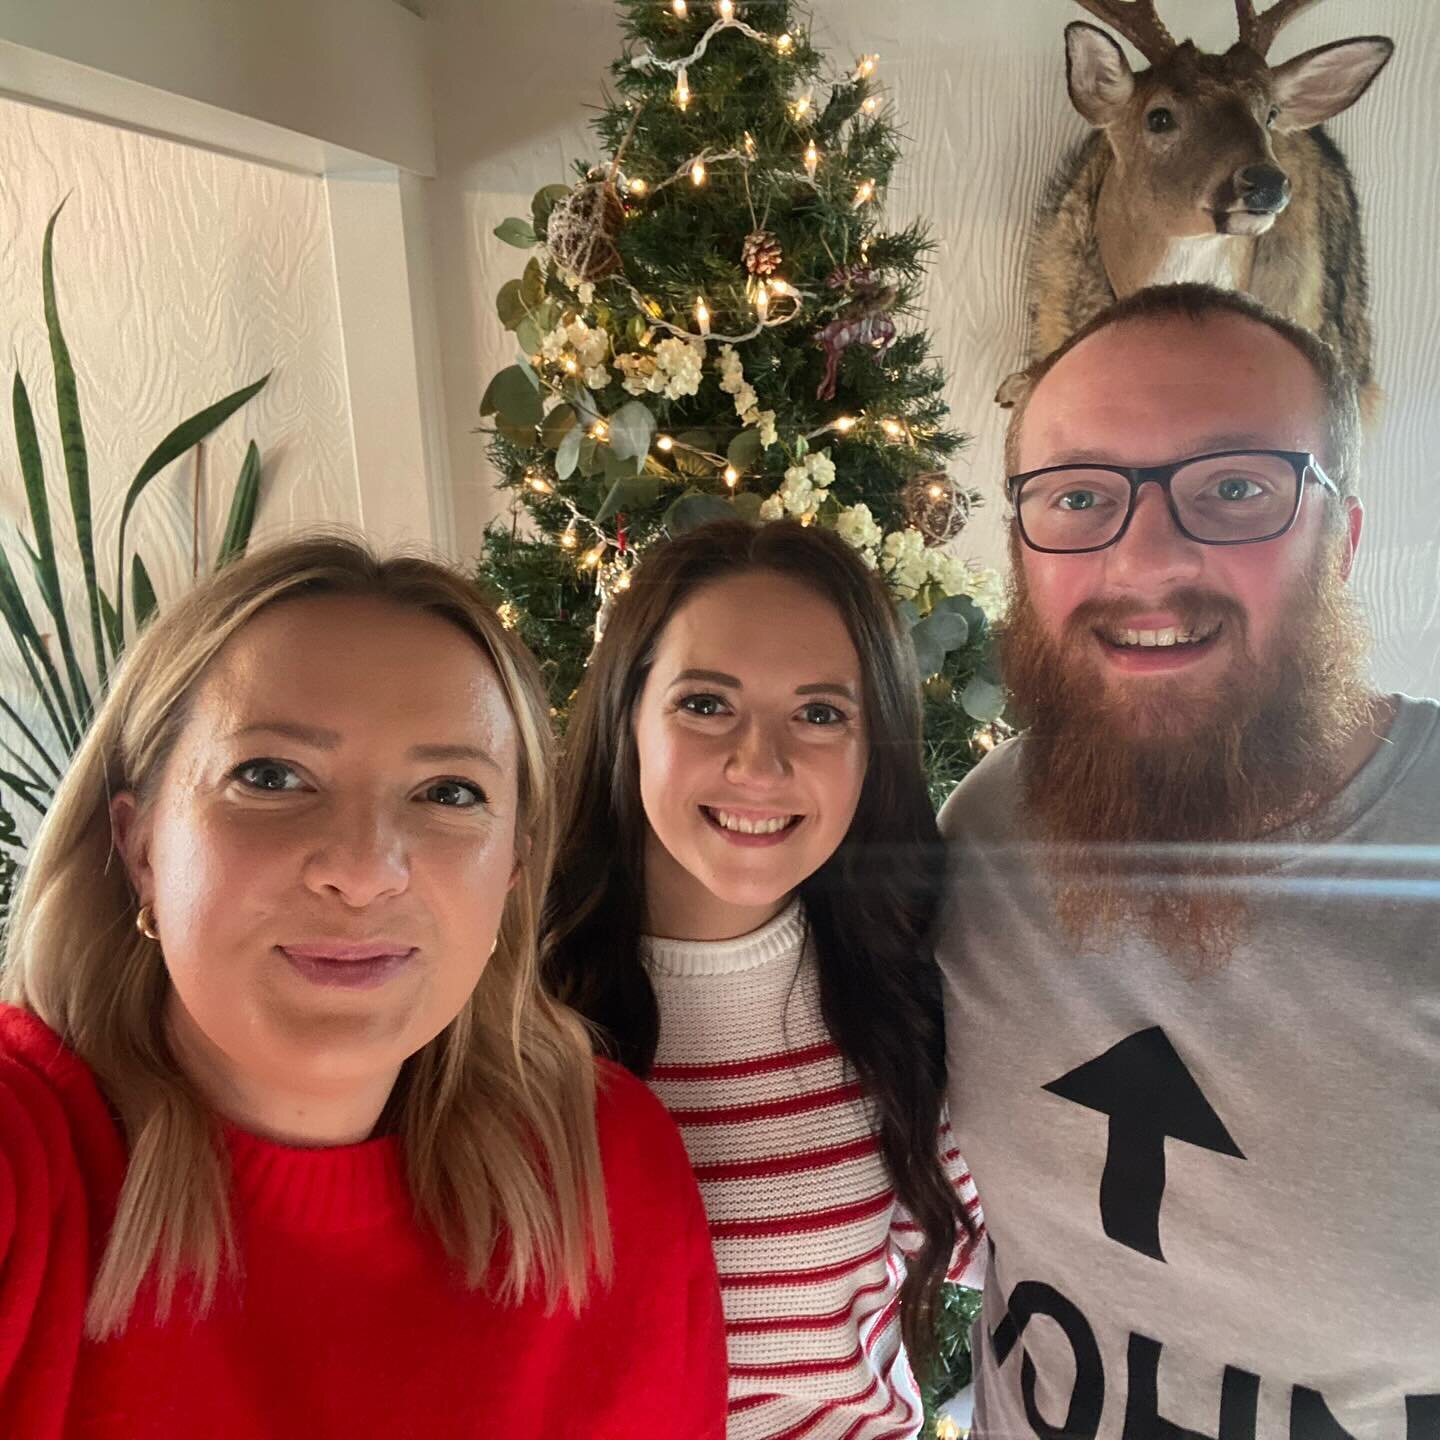 Happy Christmas everyone !! Here&rsquo;s the annual Martin sibling Christmas photo drop 🎄🎄🎄